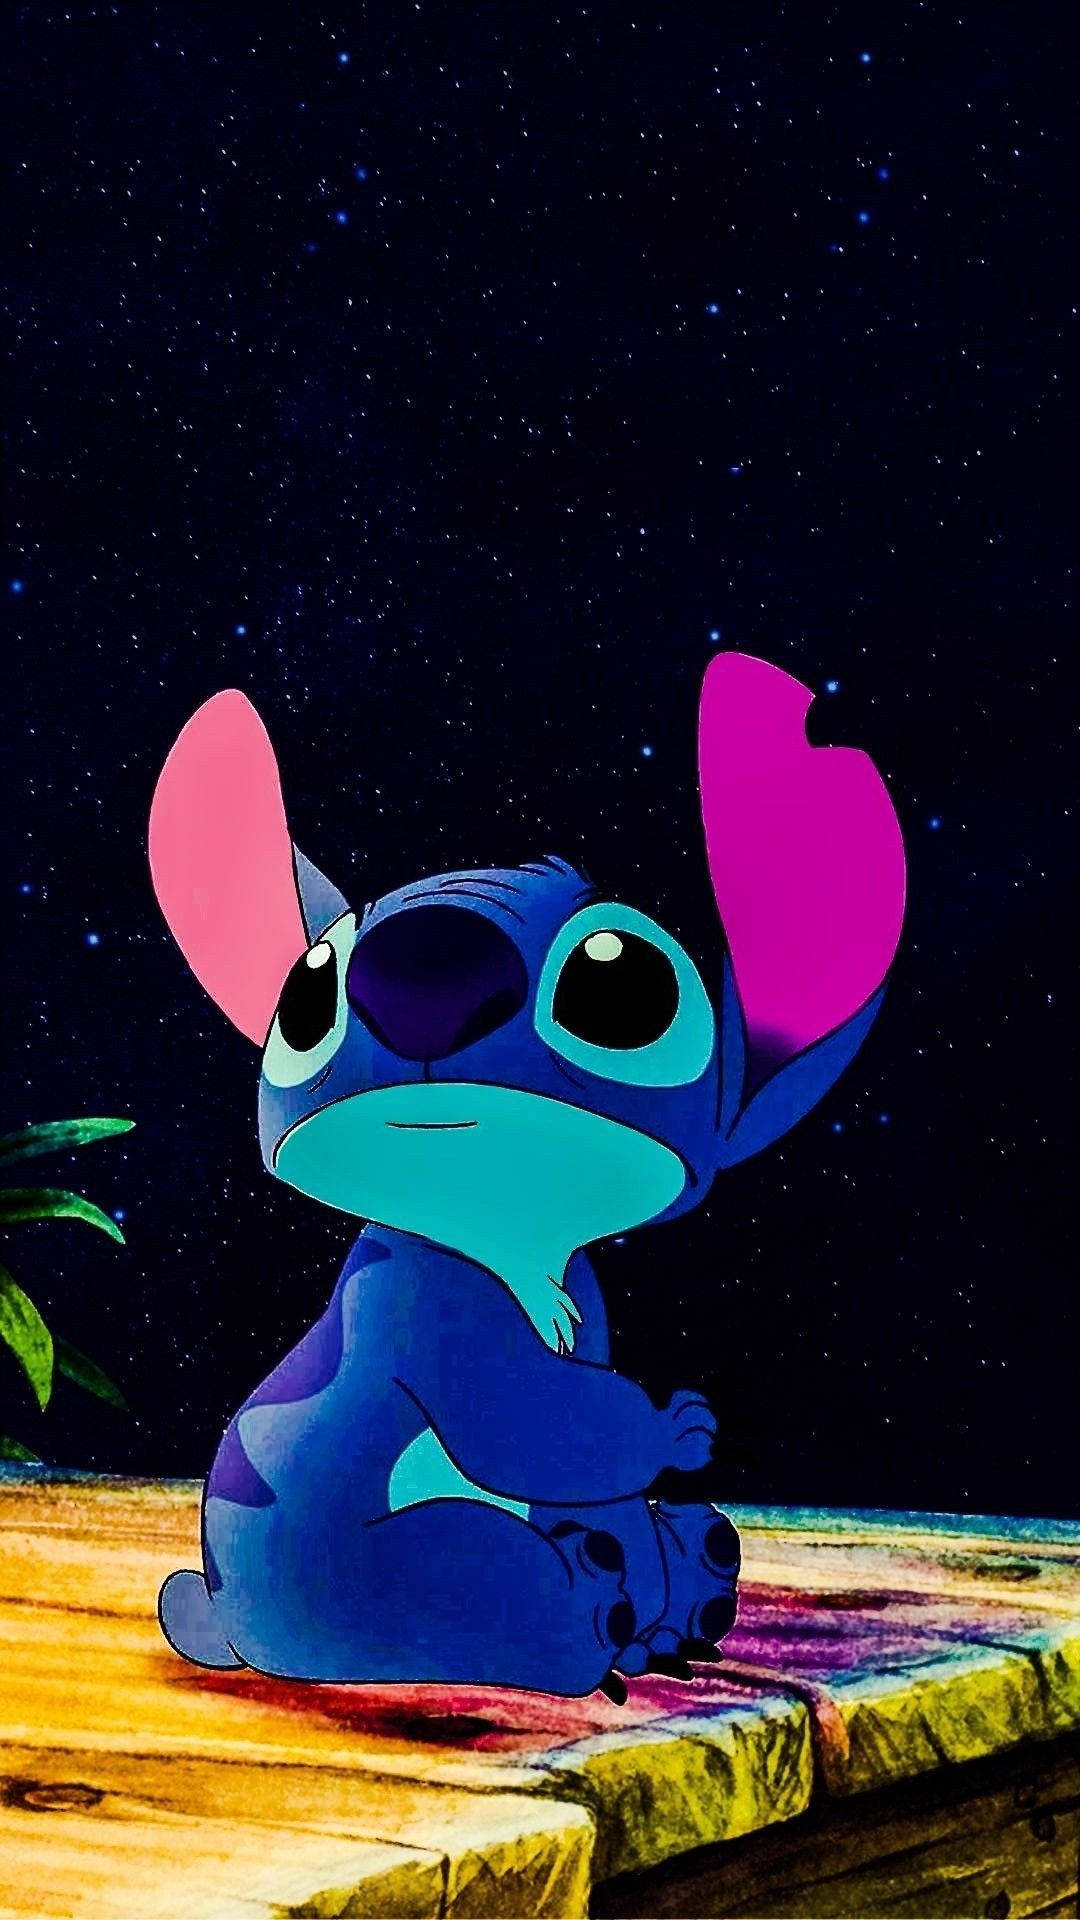 Cute Aesthetic Stitch With Night Sky Background